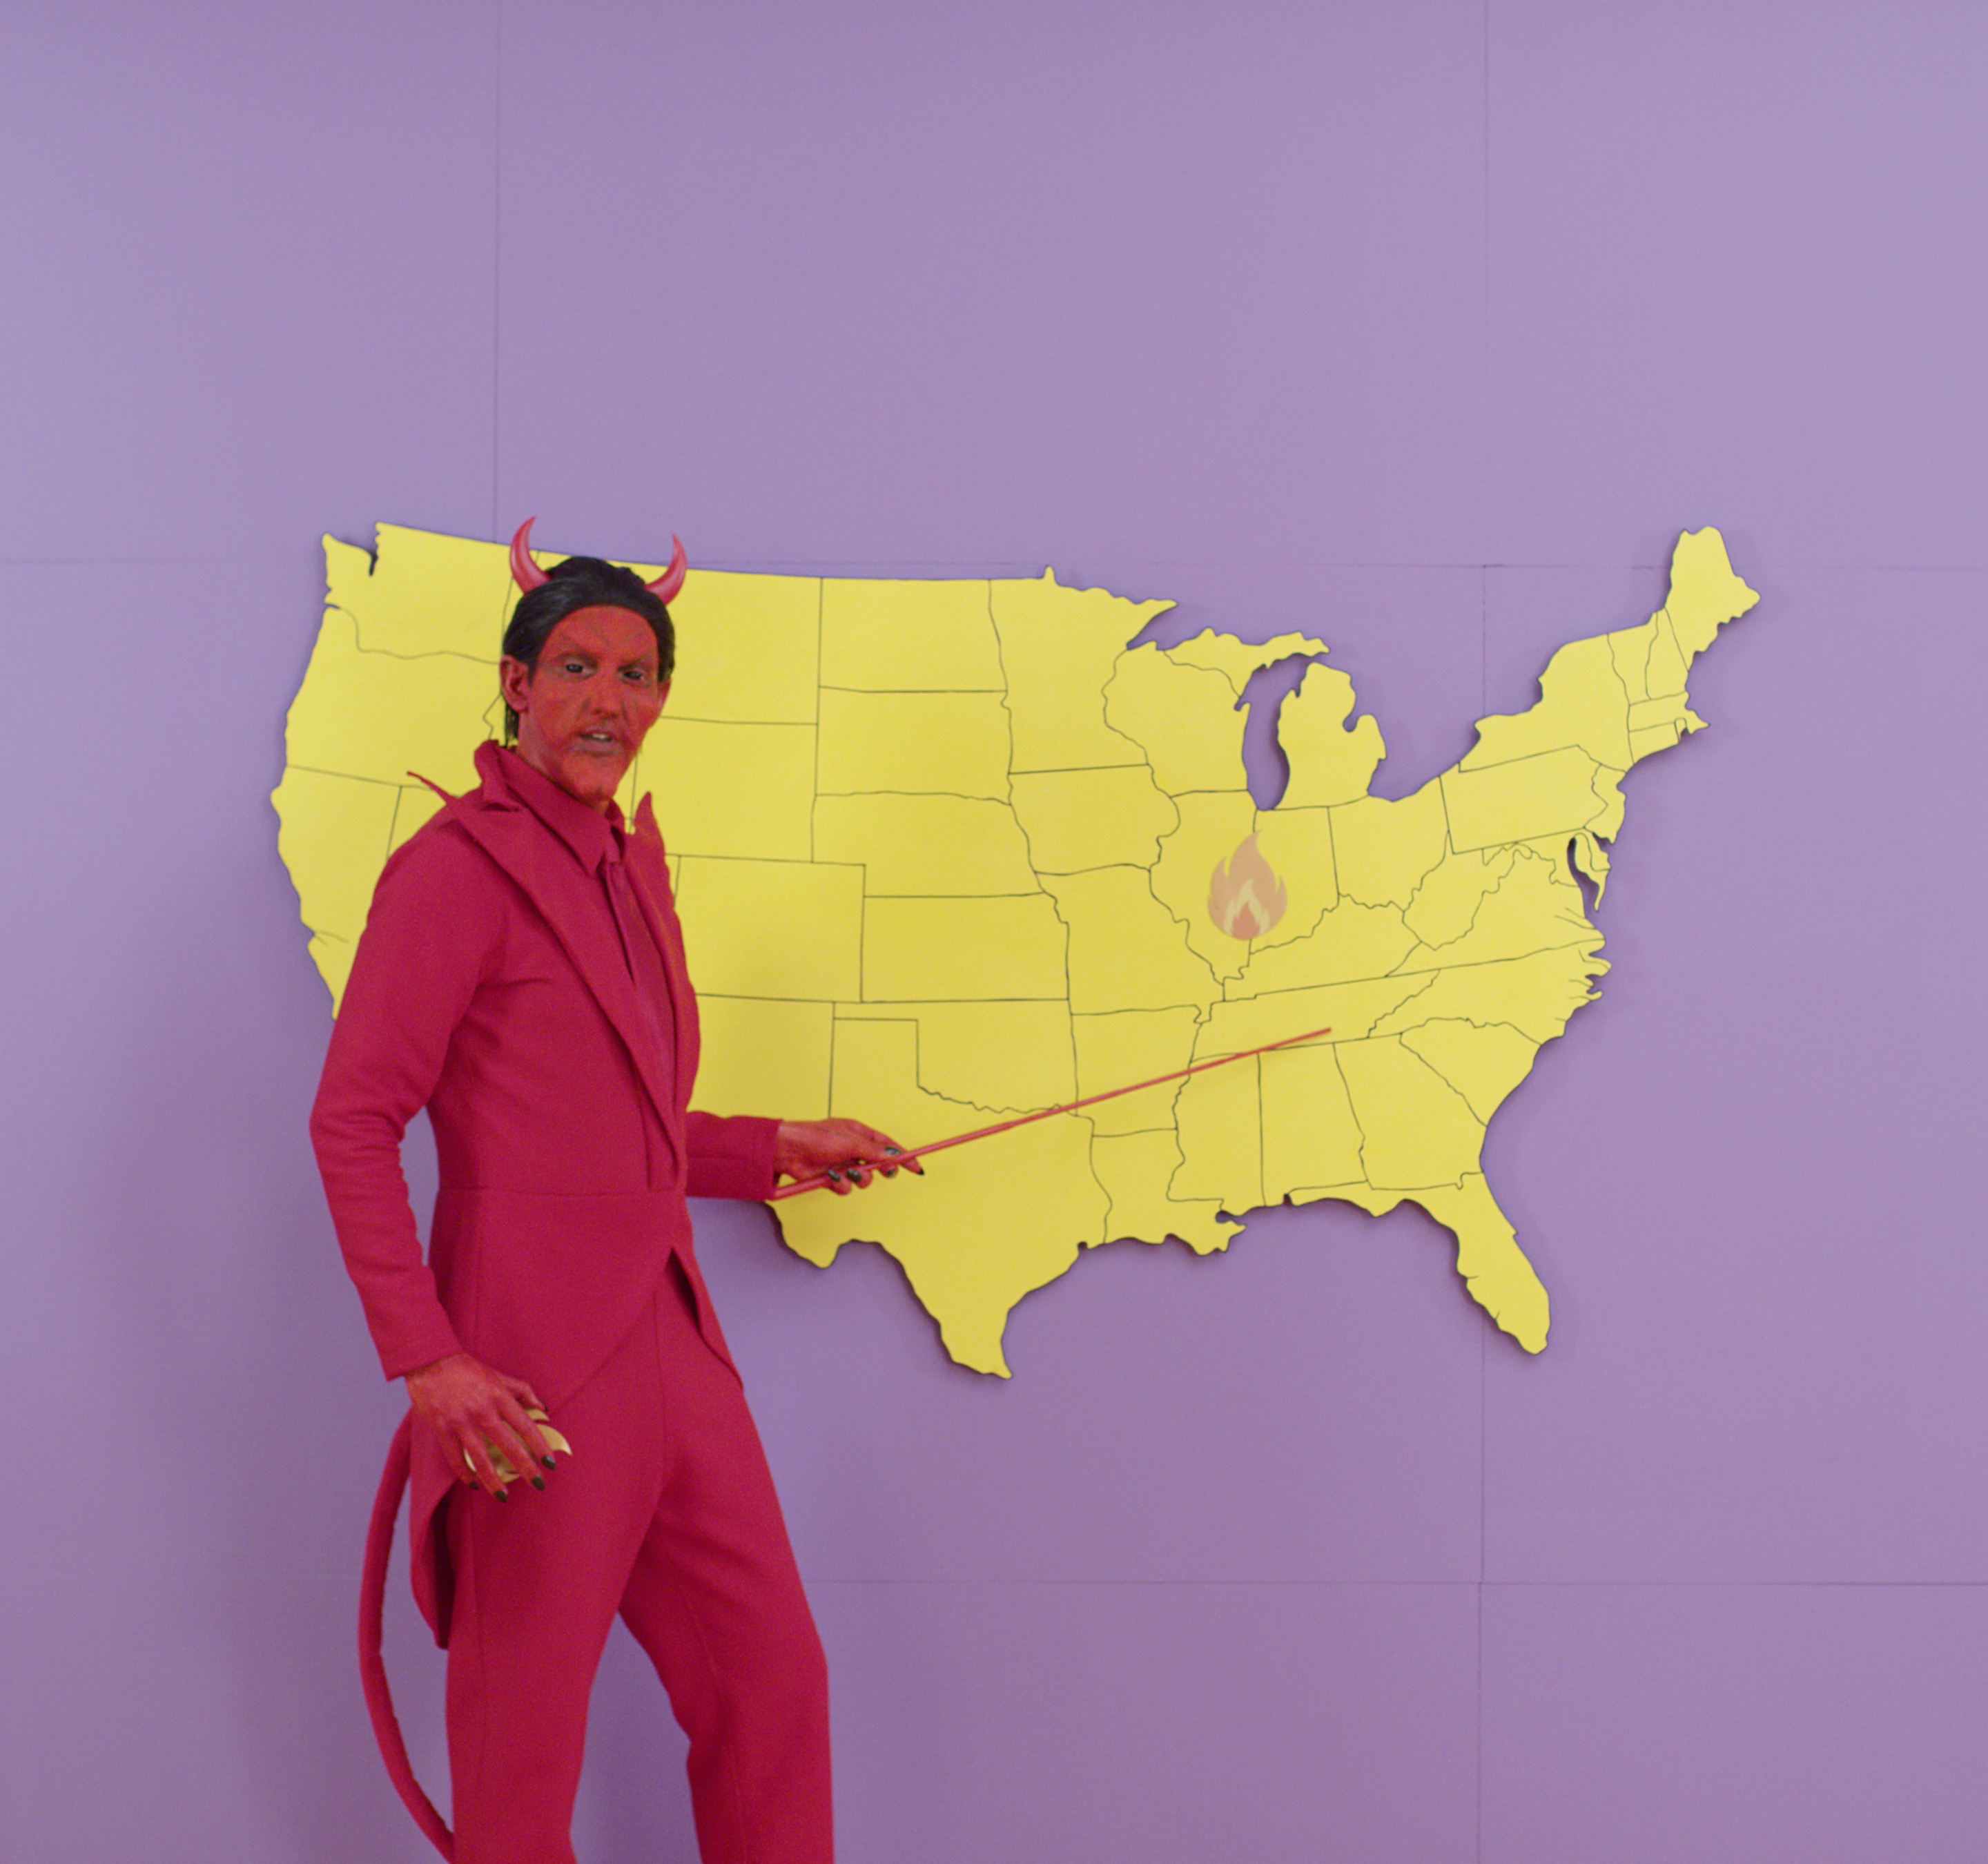 A man in a red devil costume points an indicator wand at a cutout map of the continental United States.